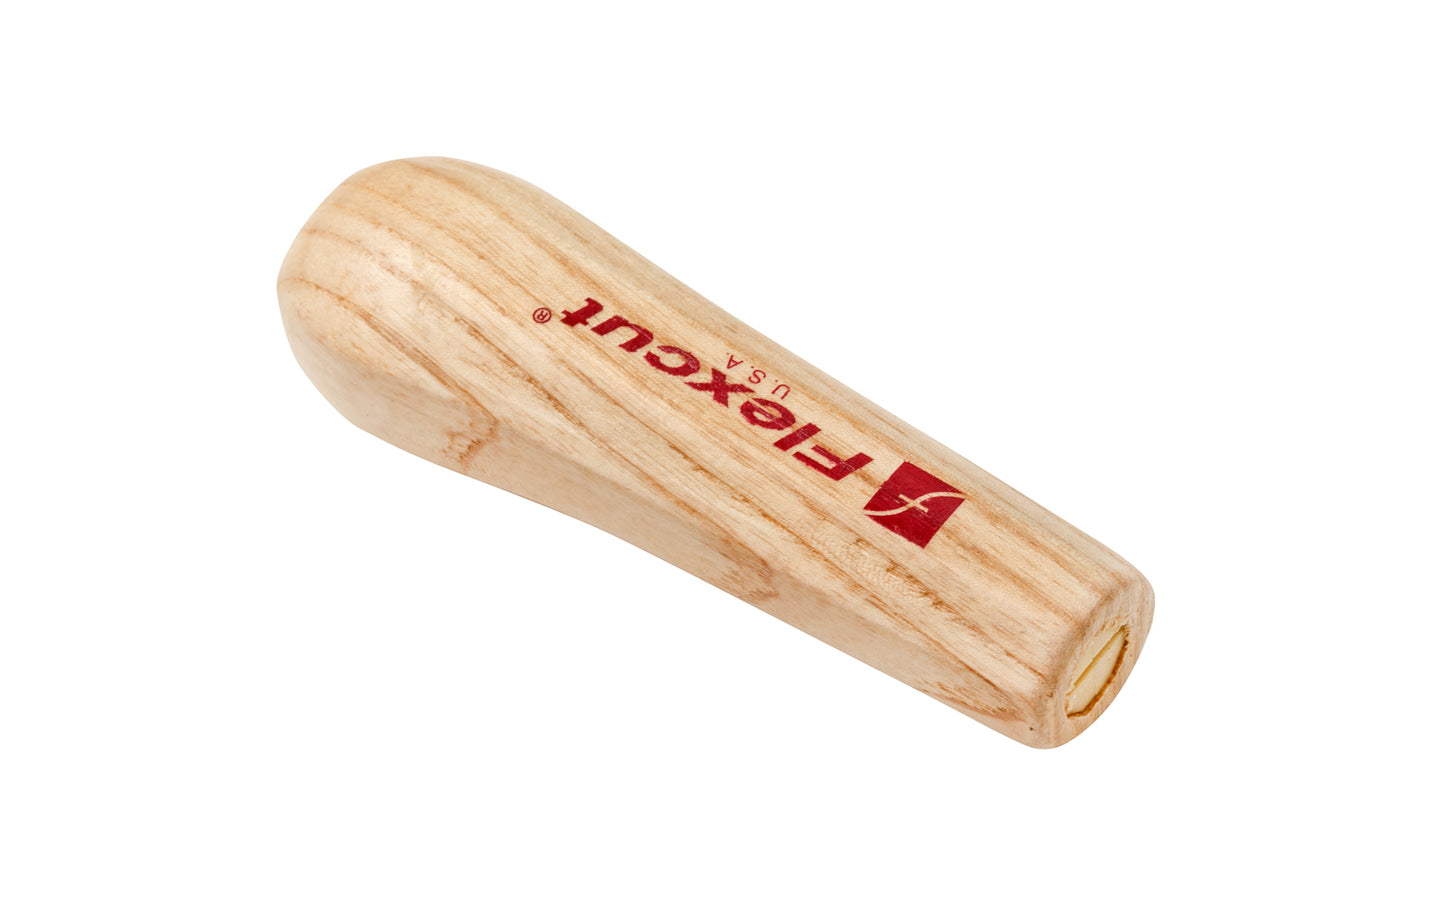 Made in USA • Model No. SK103 - Replacement power carving handle that fits any unhandled SK tool - Ash wood handle - Quick Connect handle. Fits comfortably in palm of your hand. Its shorter length allow close work for detailing. Fits any unhandled Flexcut SK tool - Palm Handle - Carving Ash Handle - 651646201032